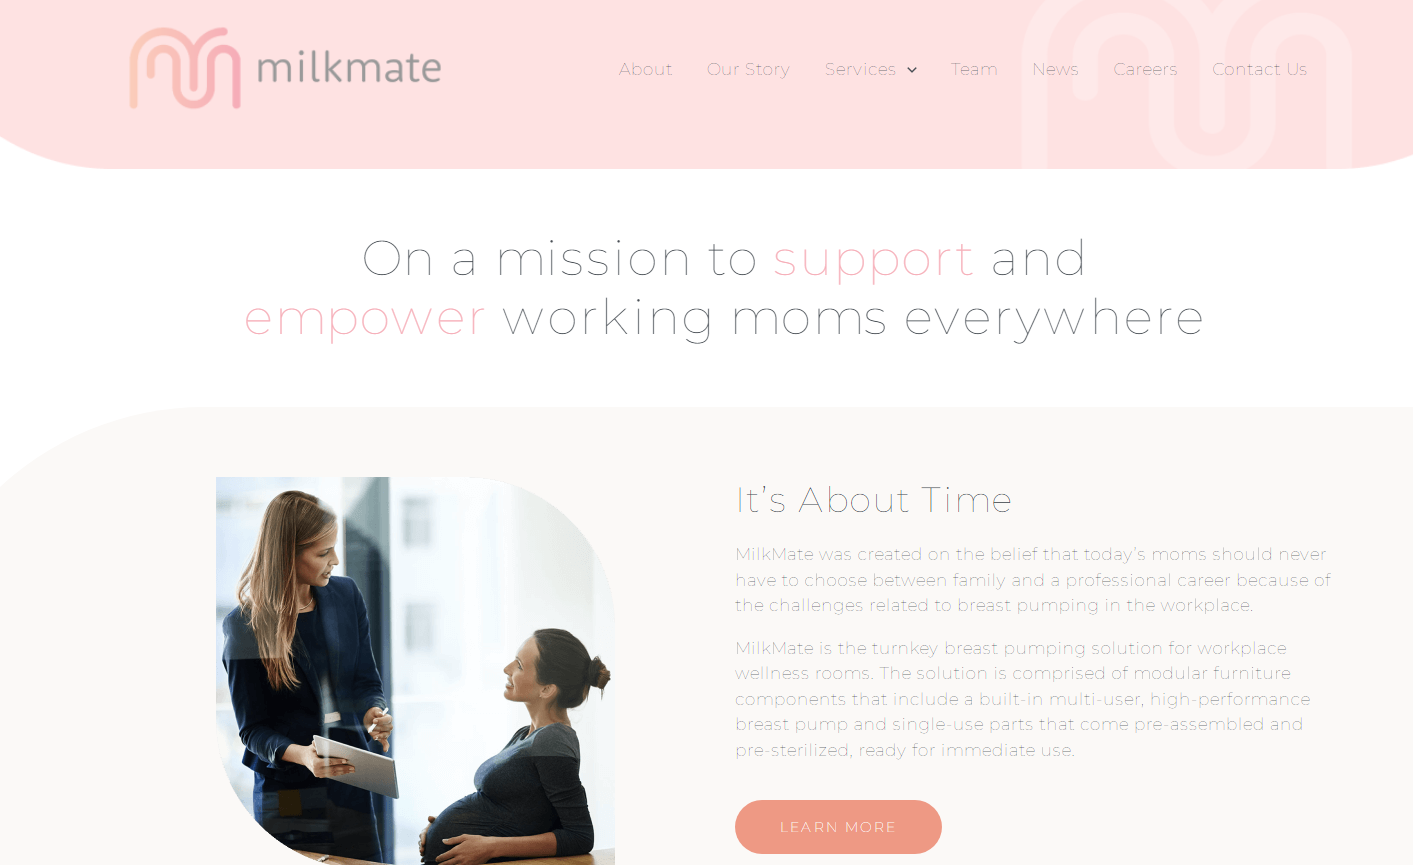 MilkMate Secures $5 Million in Seed Funding to Revolutionize Workplace Breastfeeding.